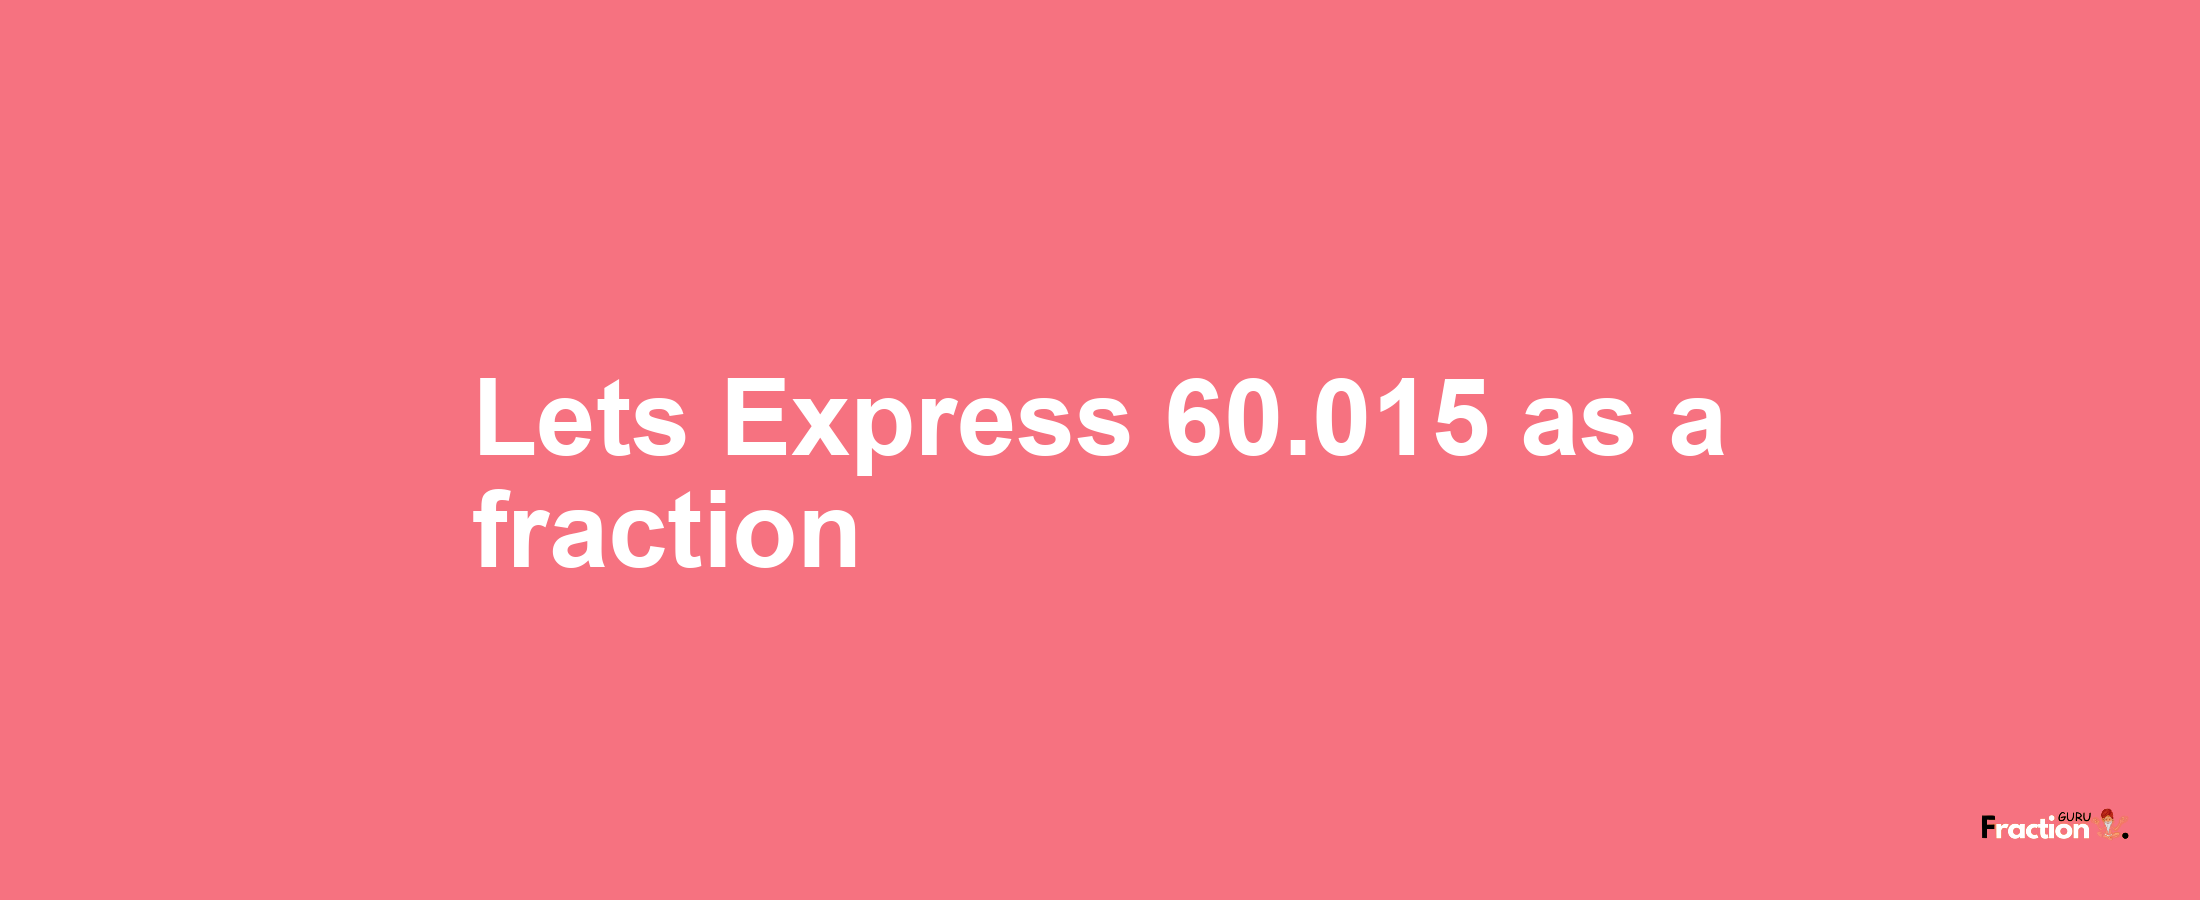 Lets Express 60.015 as afraction